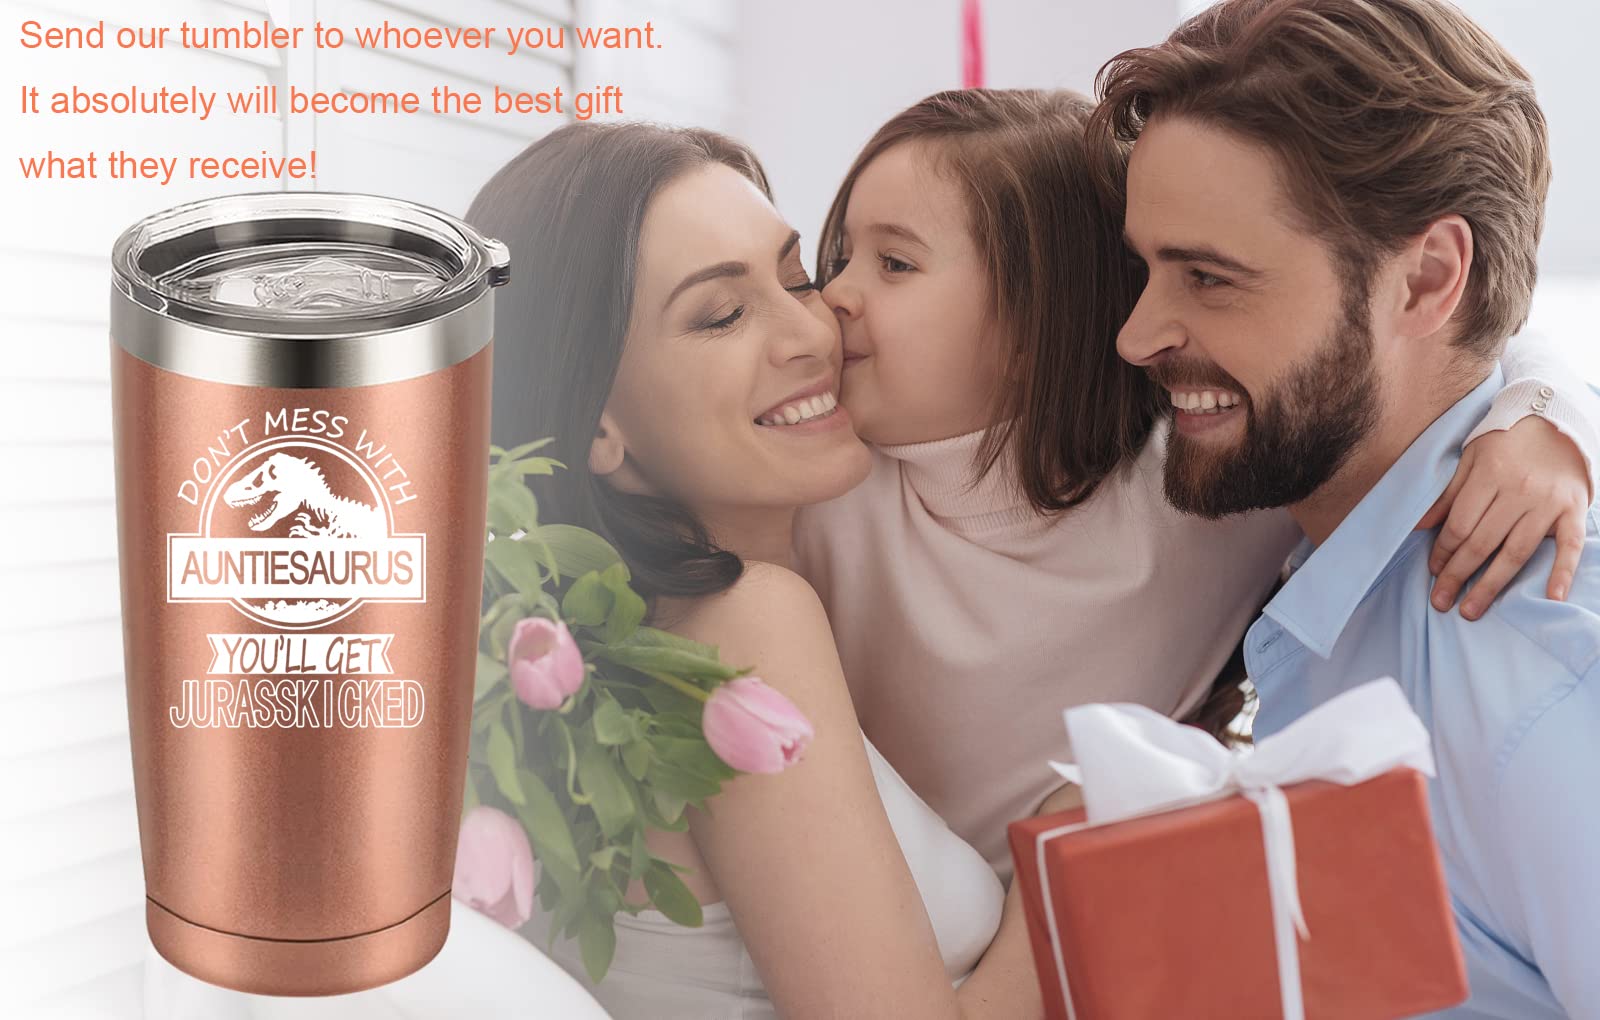 Auntiesaurus Tumbler Don't Mess with Auntiesaurus You'll Get Jurasskicked Travel Tumbler Birthday Mothers Day Gifts for Auntie Aunt from Nephew Niece Auntie Gifts with 2 Lids and Straws 20OZ Rose Gold